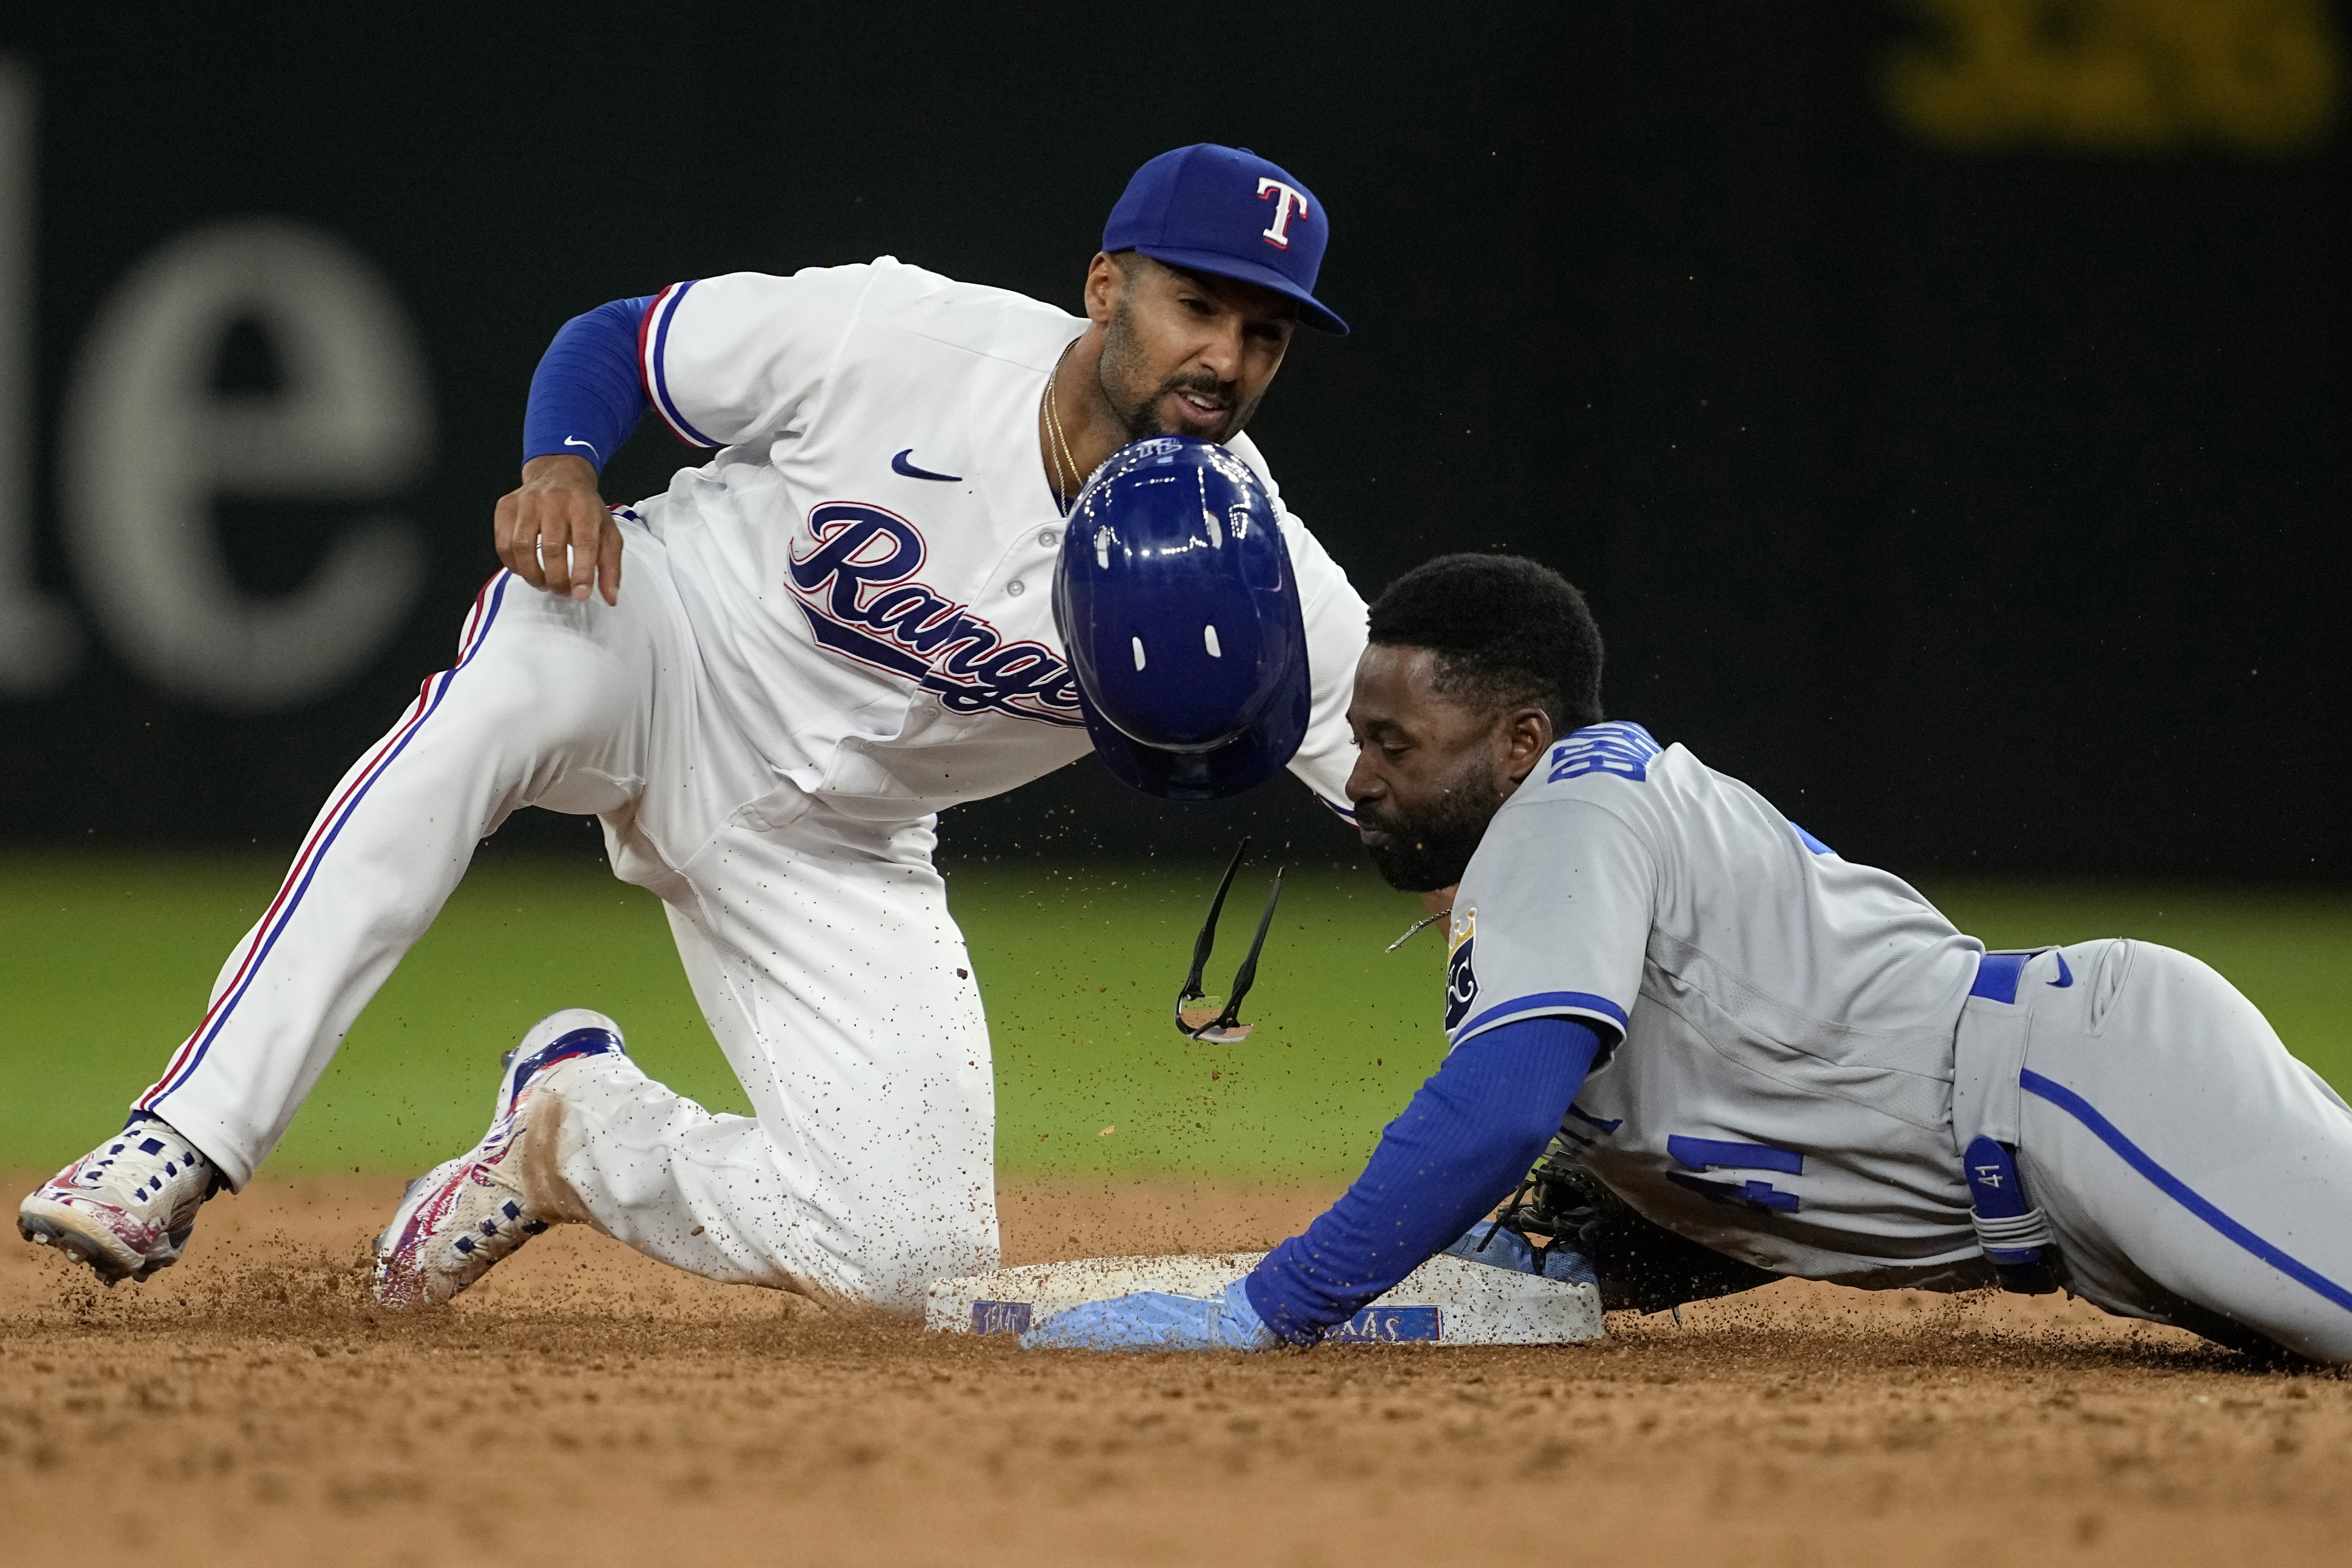 Corey Seager, Marcus Semien set to lead Rangers